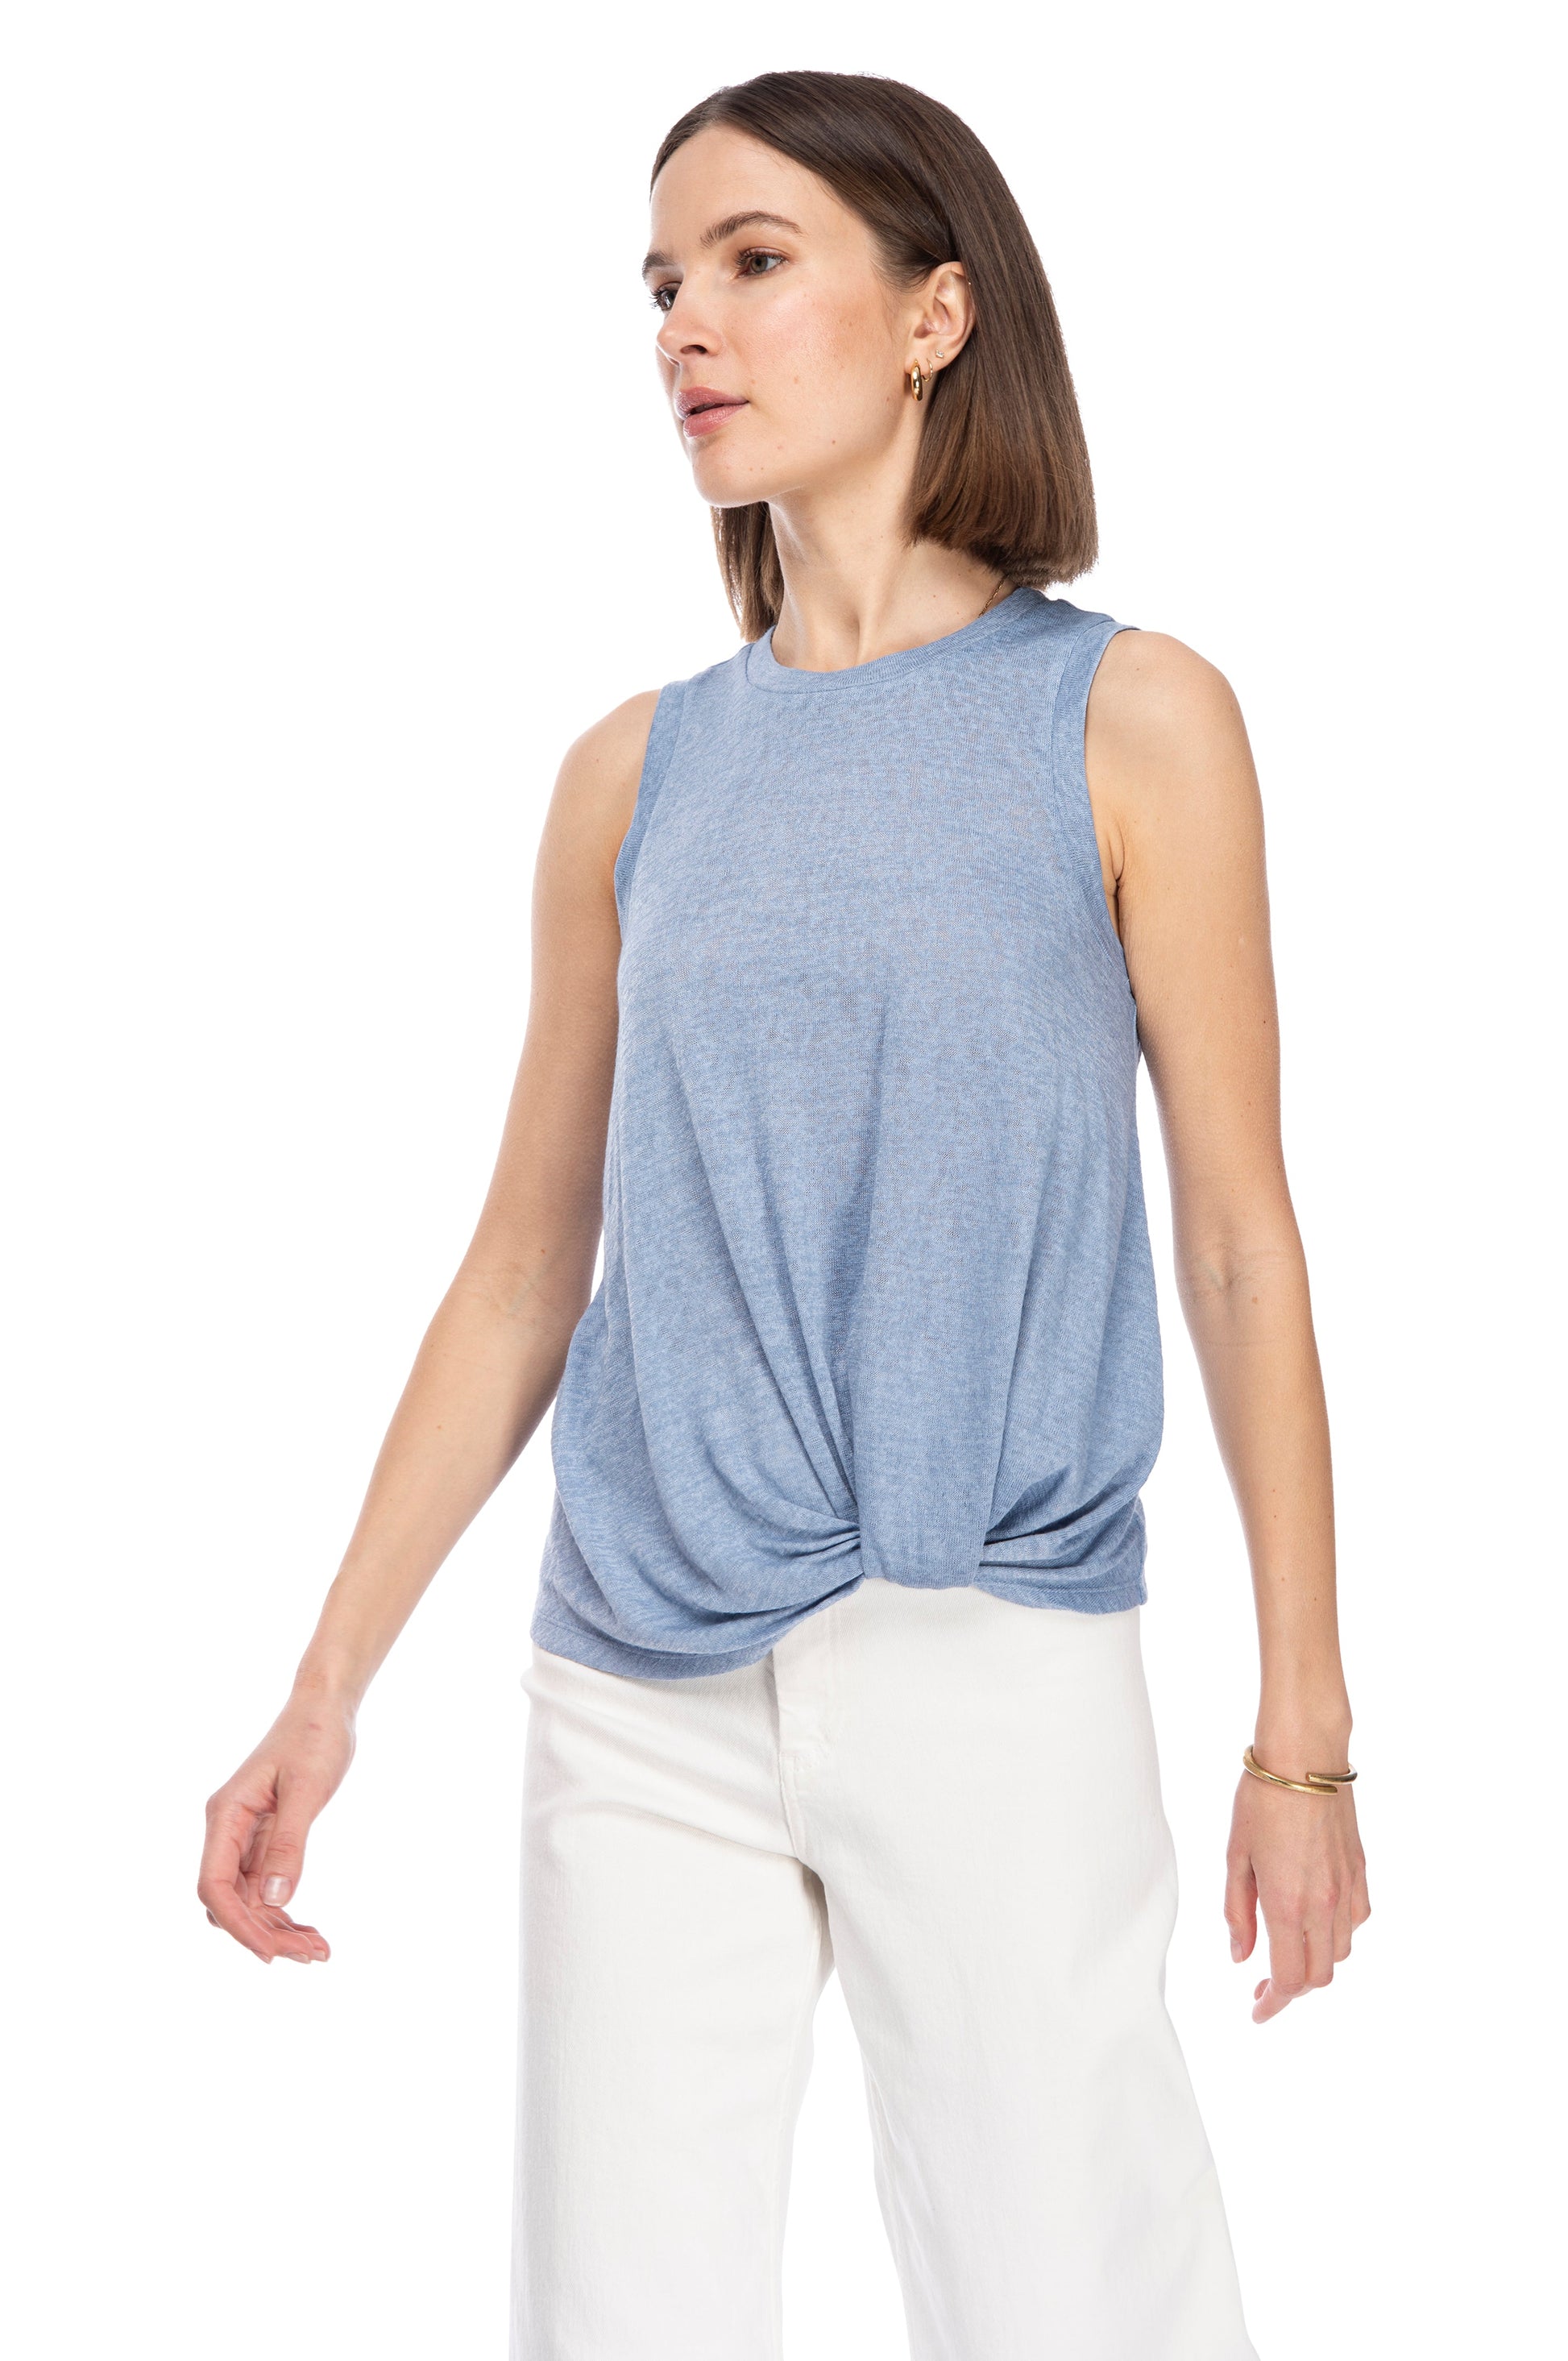 A person in a casual sleeveless blue CATY TWIST HEM CREW knit top and white pants posing against a white background. (B Collection by Bobeau)